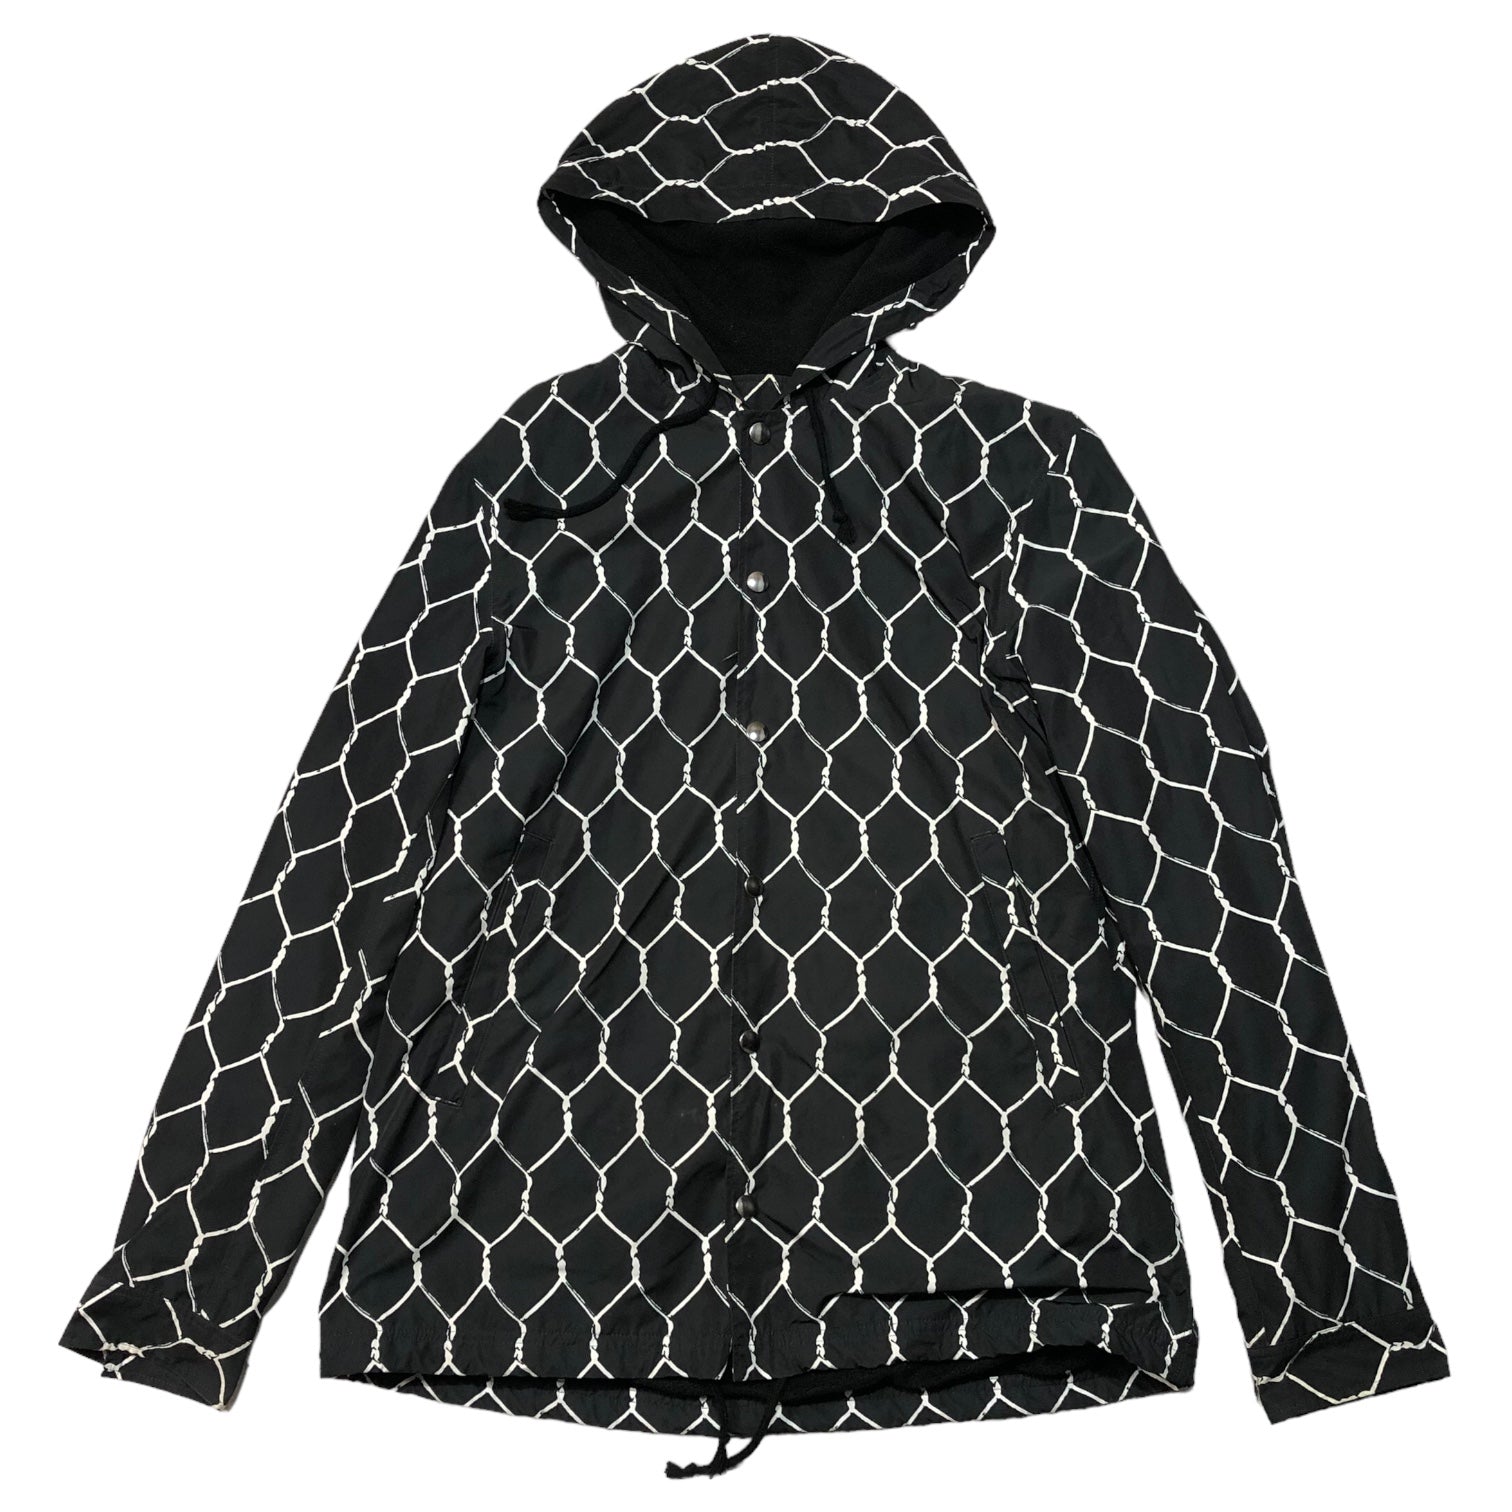 UNDERCOVER(アンダーカバー) 16AW Pe twill hooded coach jacket ロゴ 